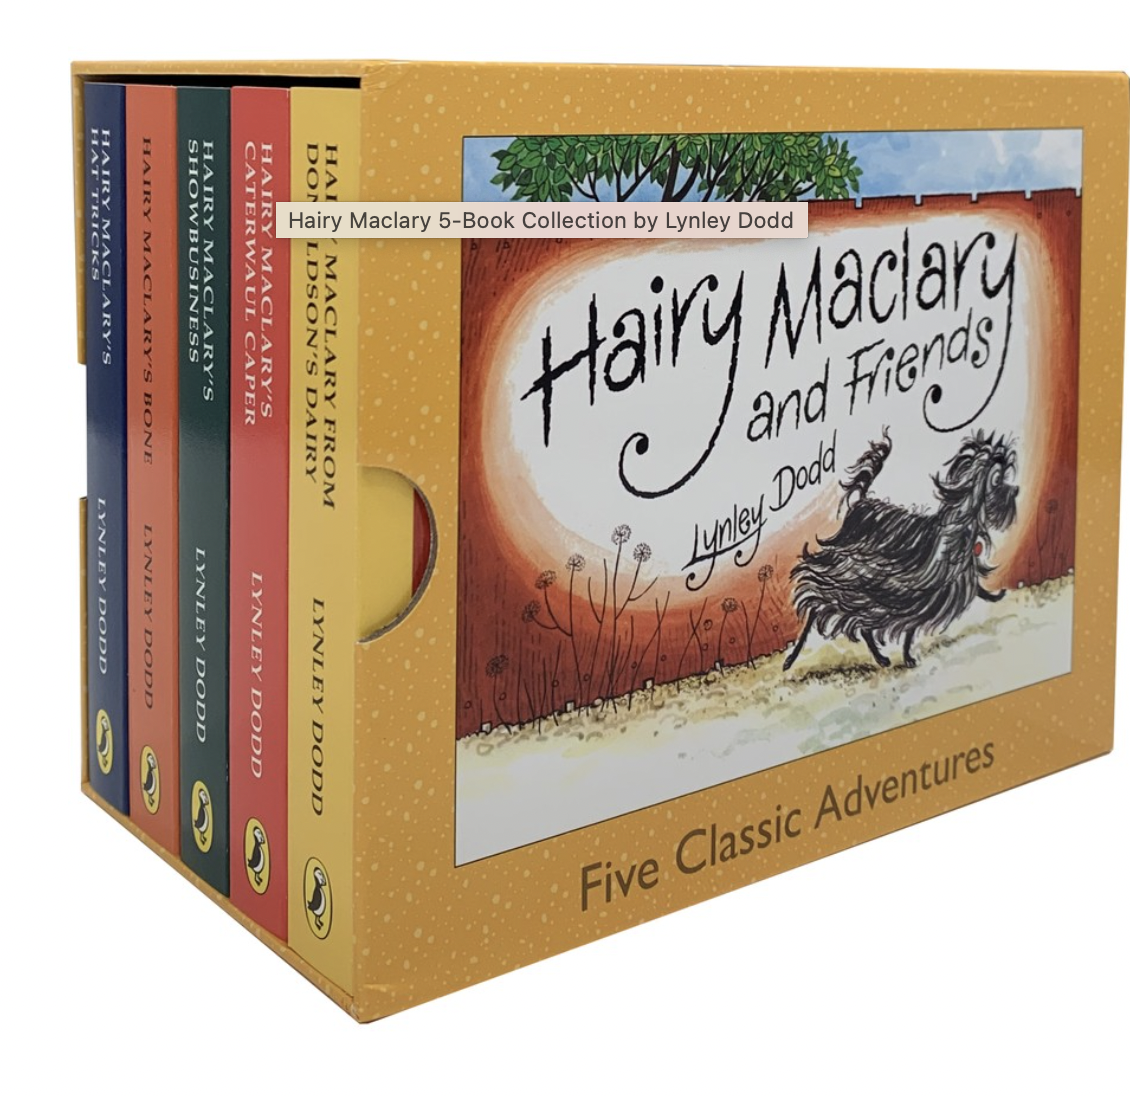 Hairy Maclary 5-Book Collection by Lynley Dodd